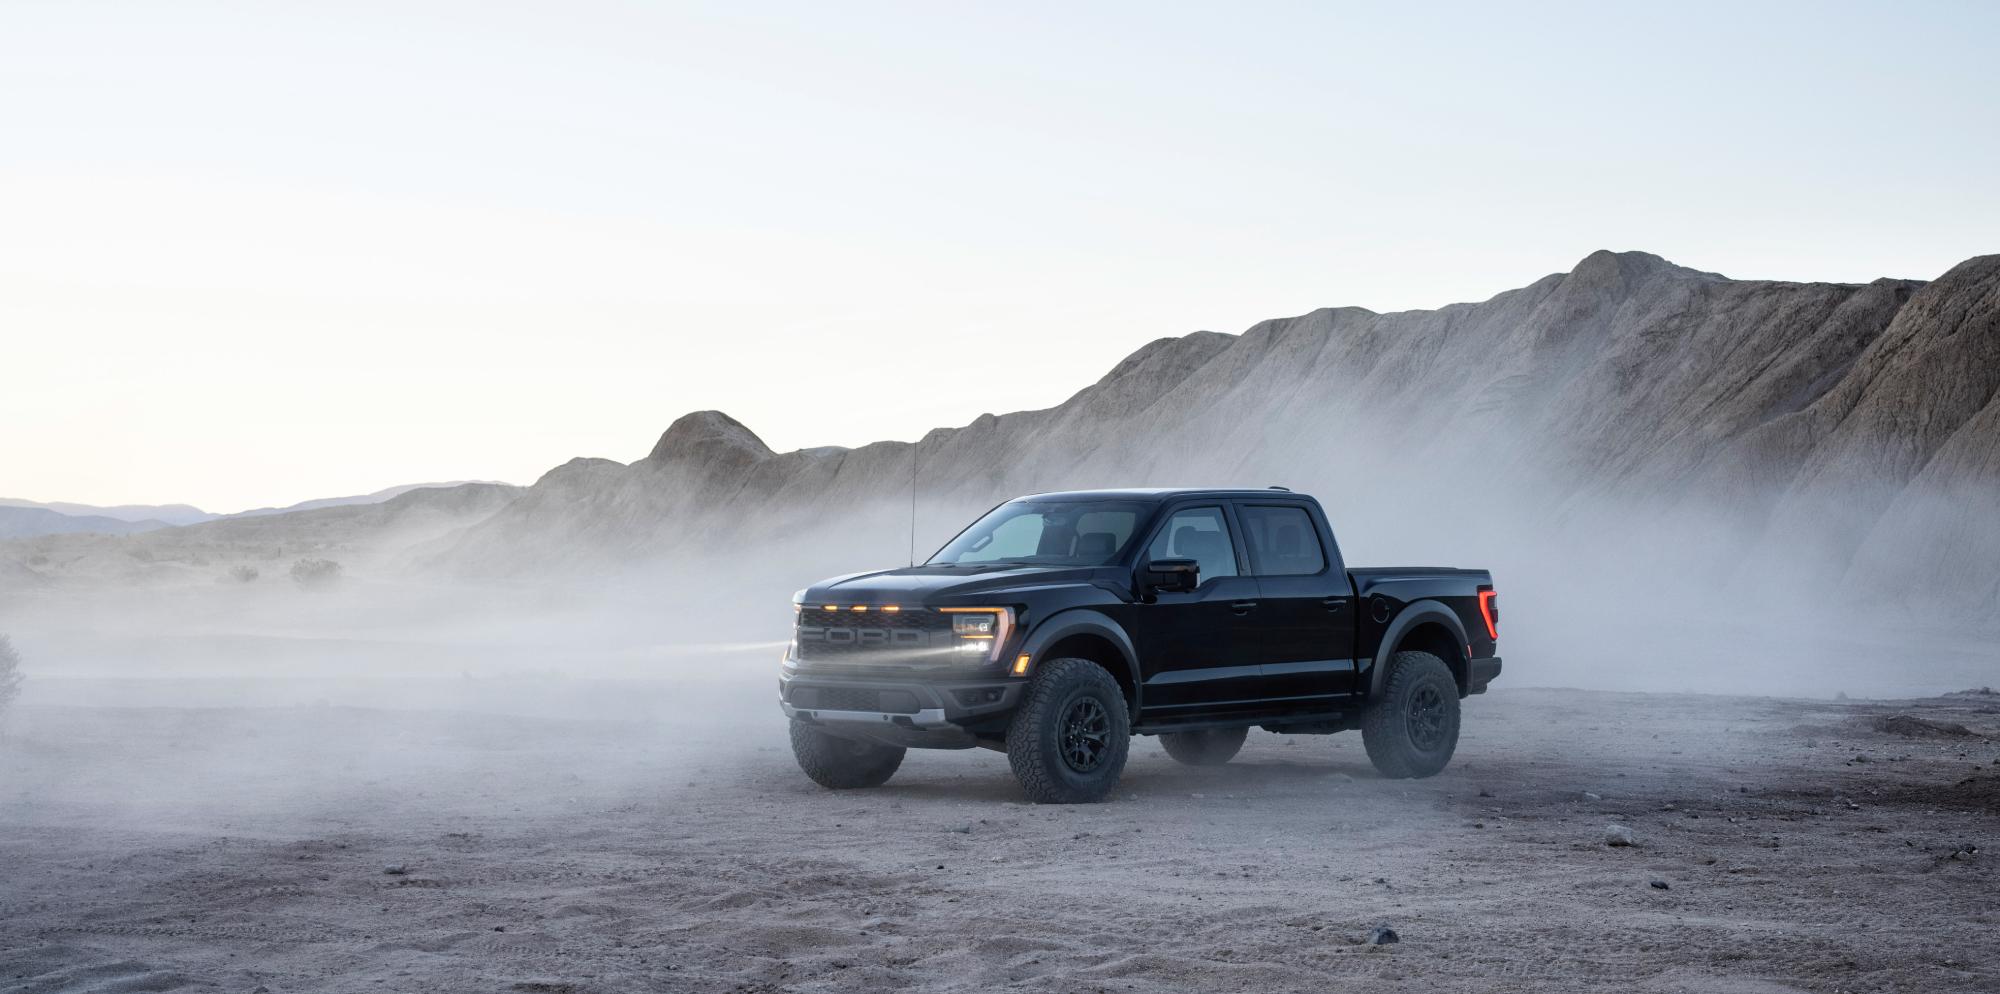 The Ford F-150 Raptor will see some performance upgrades with the 2022 F-150 Raptor R.